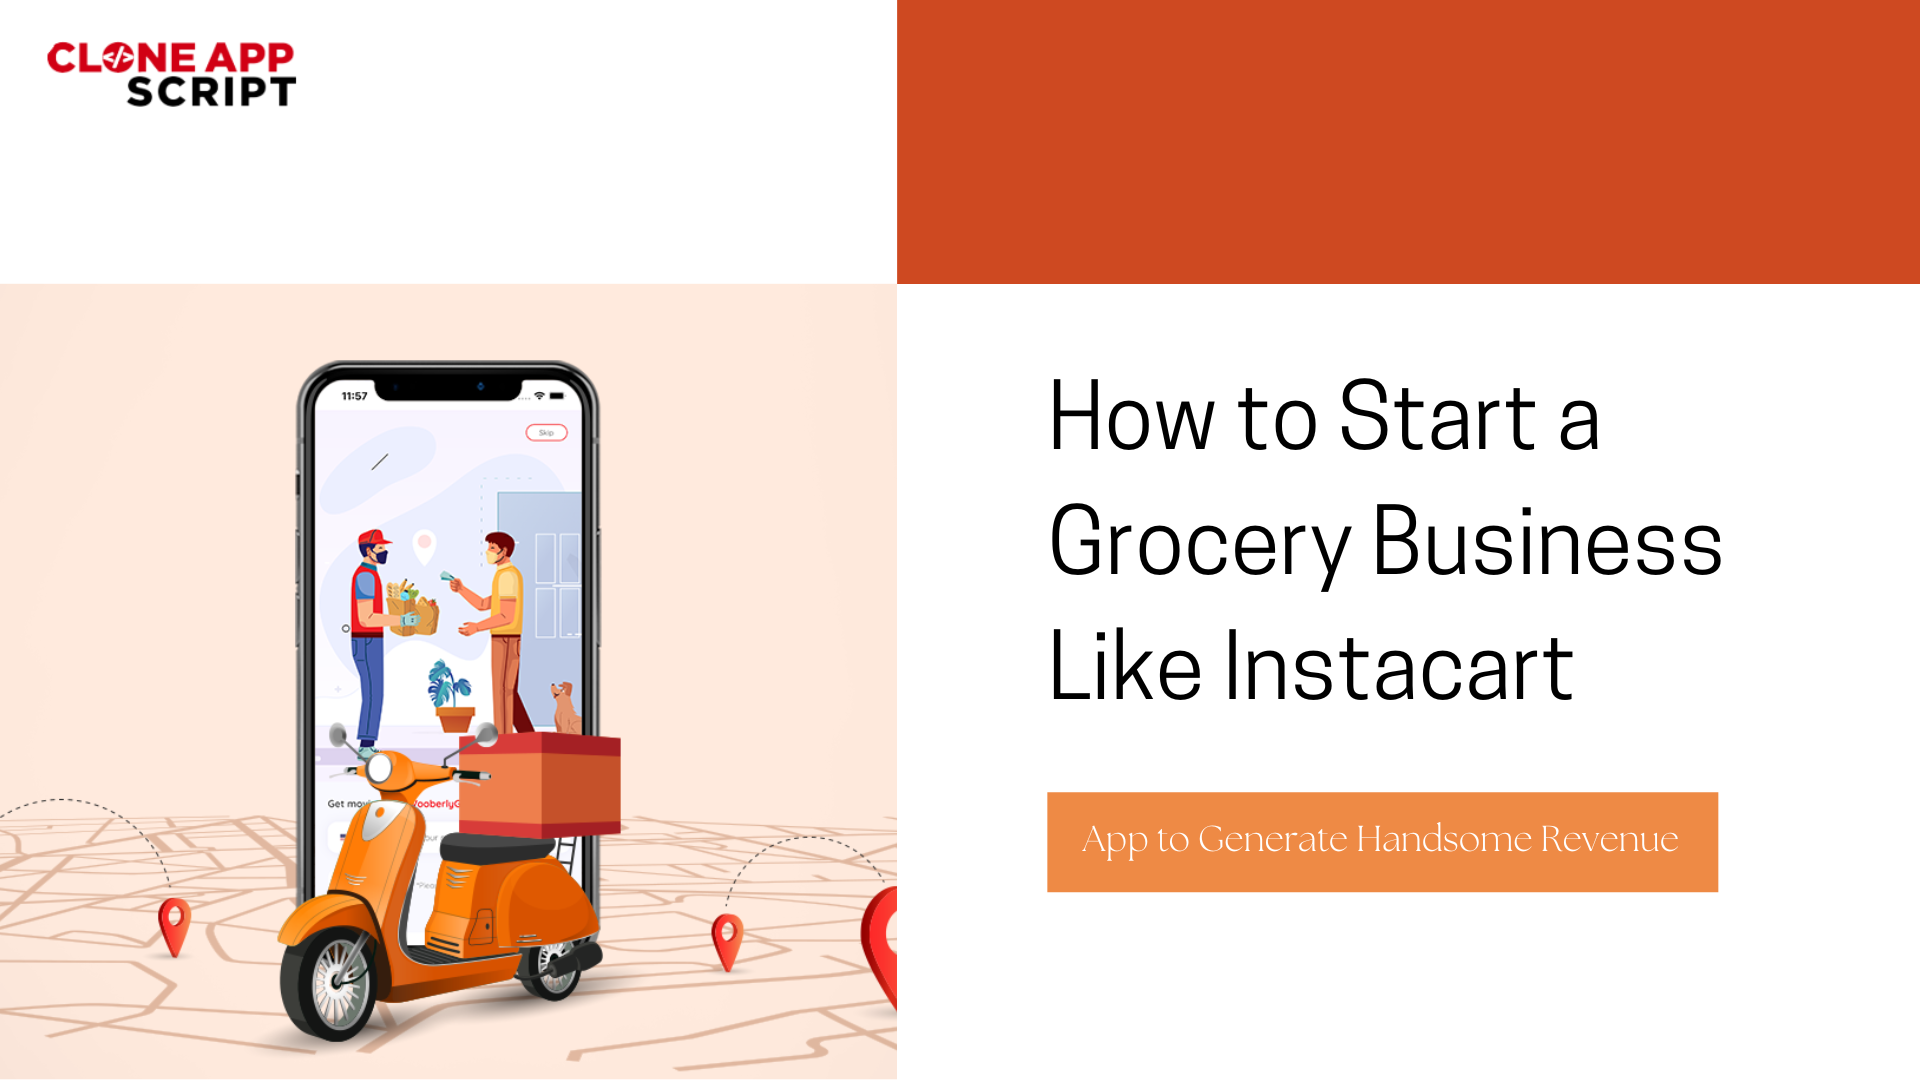 How to Start a Grocery Business Like Instacart and Generate Handsome Revenue?